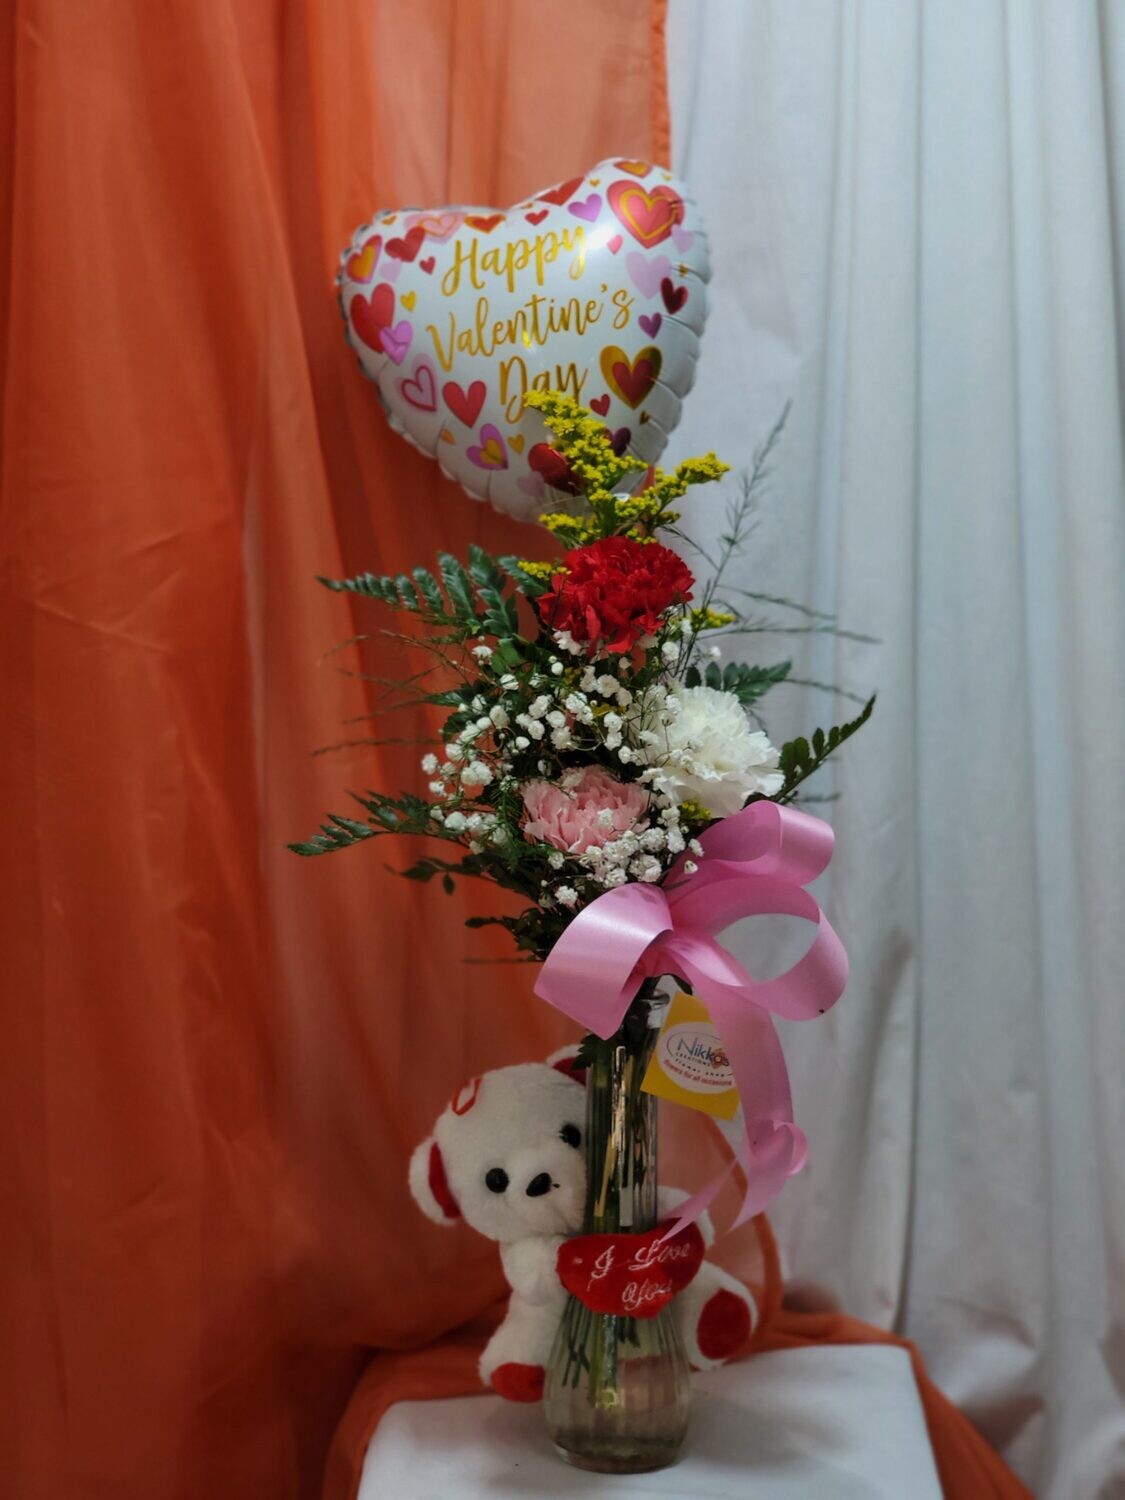 1 Pink, 1 Red, 1 White carnation, Teddy and Balloon